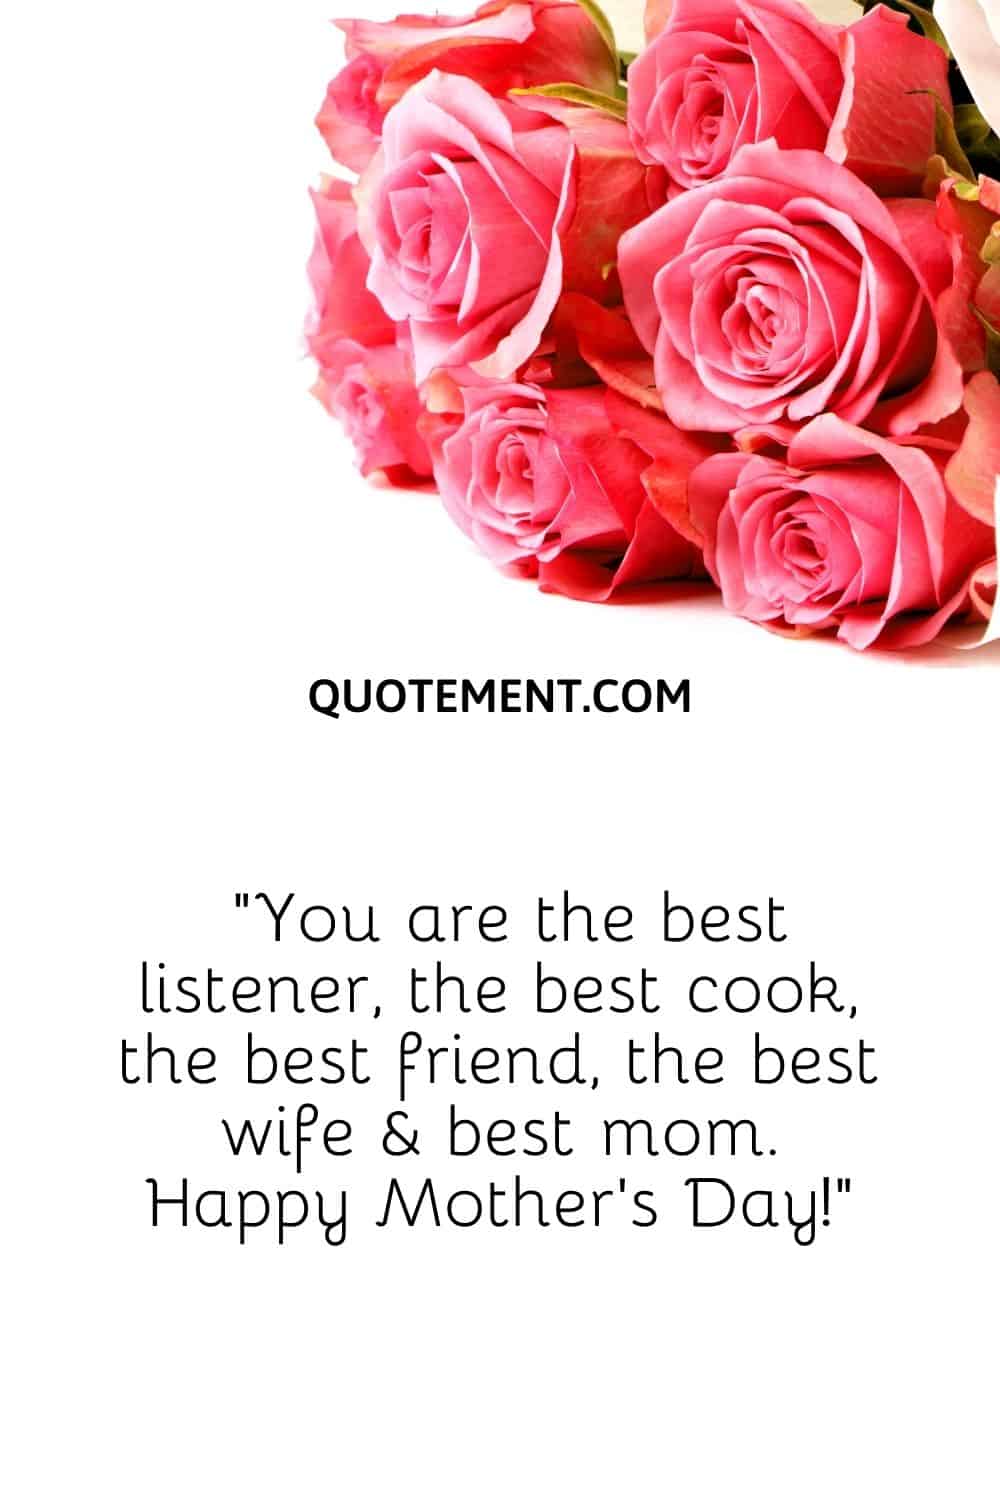 You are the best listener, the best cook, the best friend, the best wife & best mom